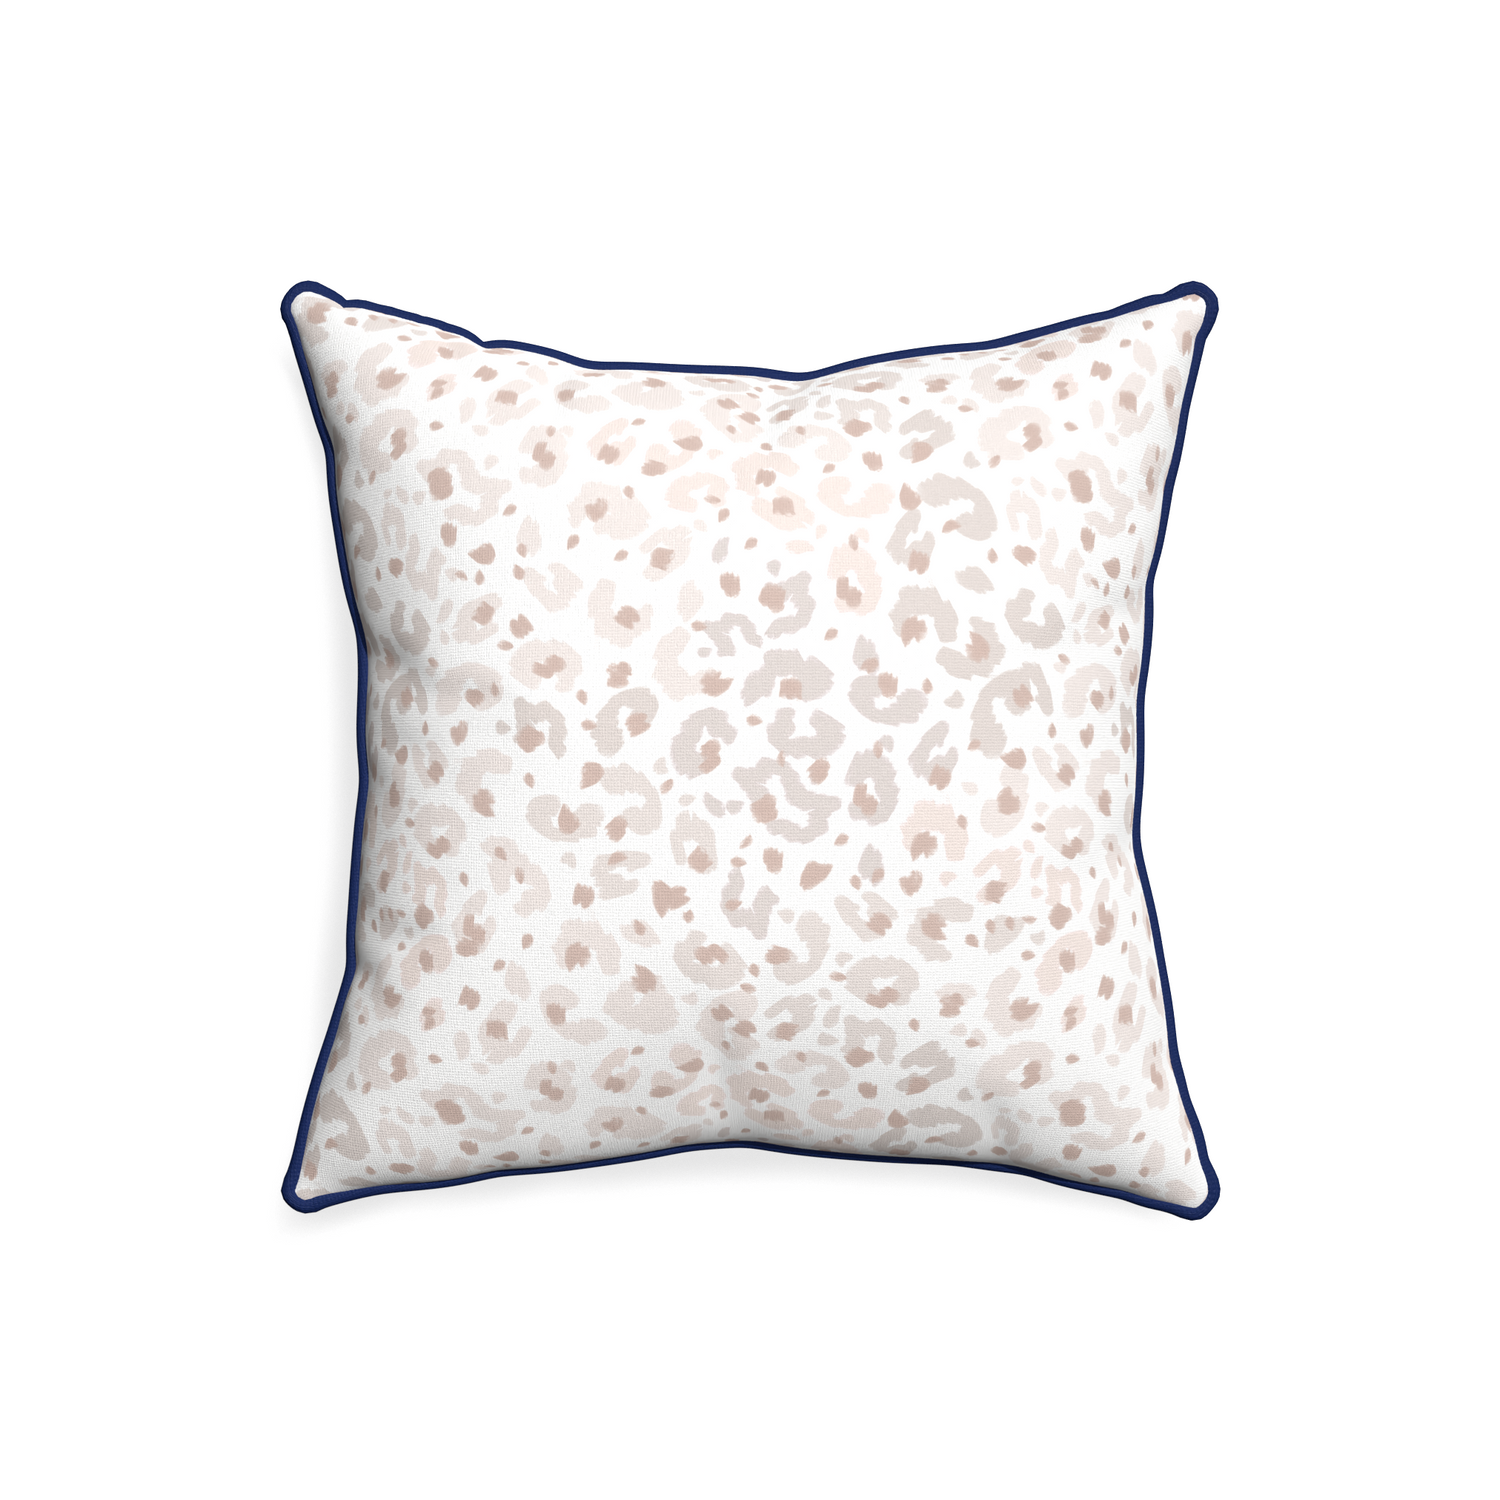 20-square rosie custom pillow with midnight piping on white background